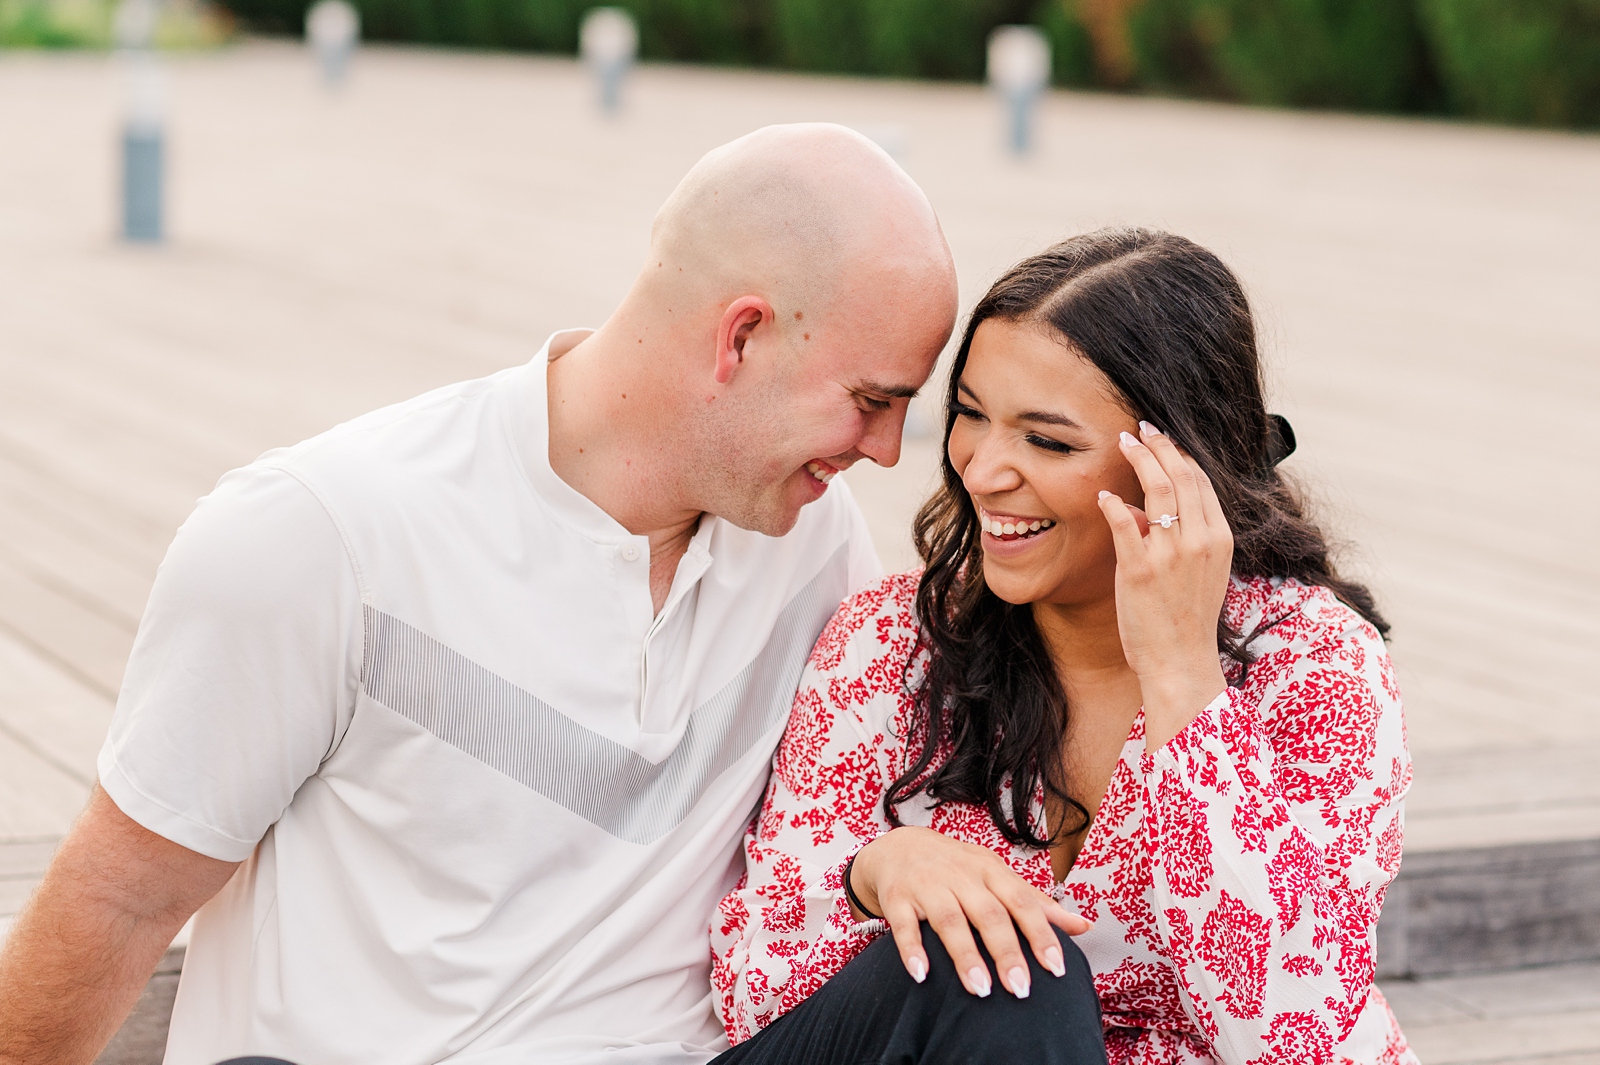 A VMFA Engagement Session in Downtown Richmond. Photography by Richmond Wedding Photographer Kailey Brianne Photography. 